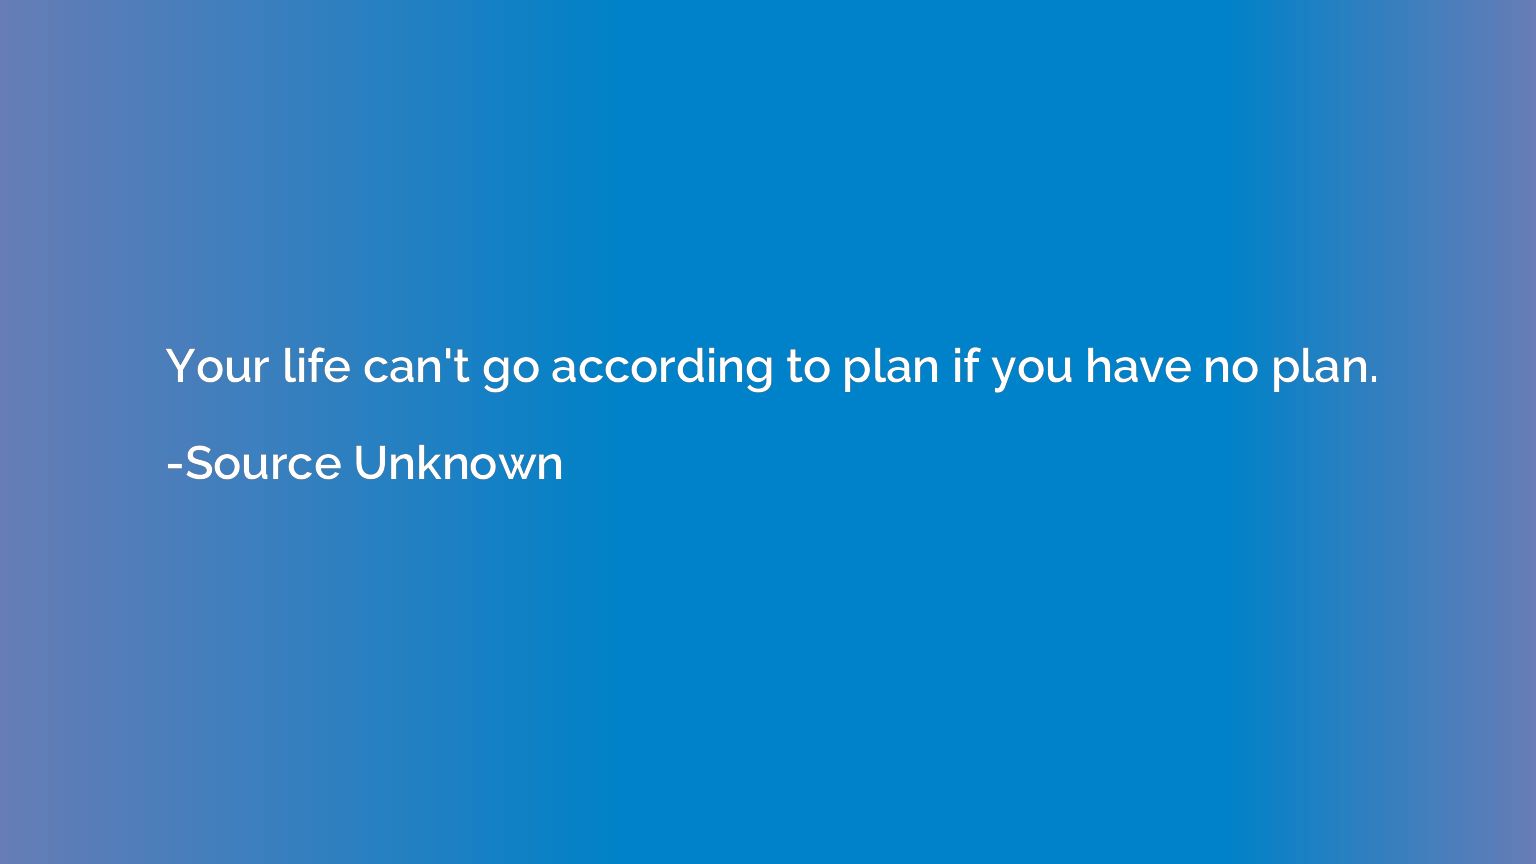 Your life can't go according to plan if you have no plan.